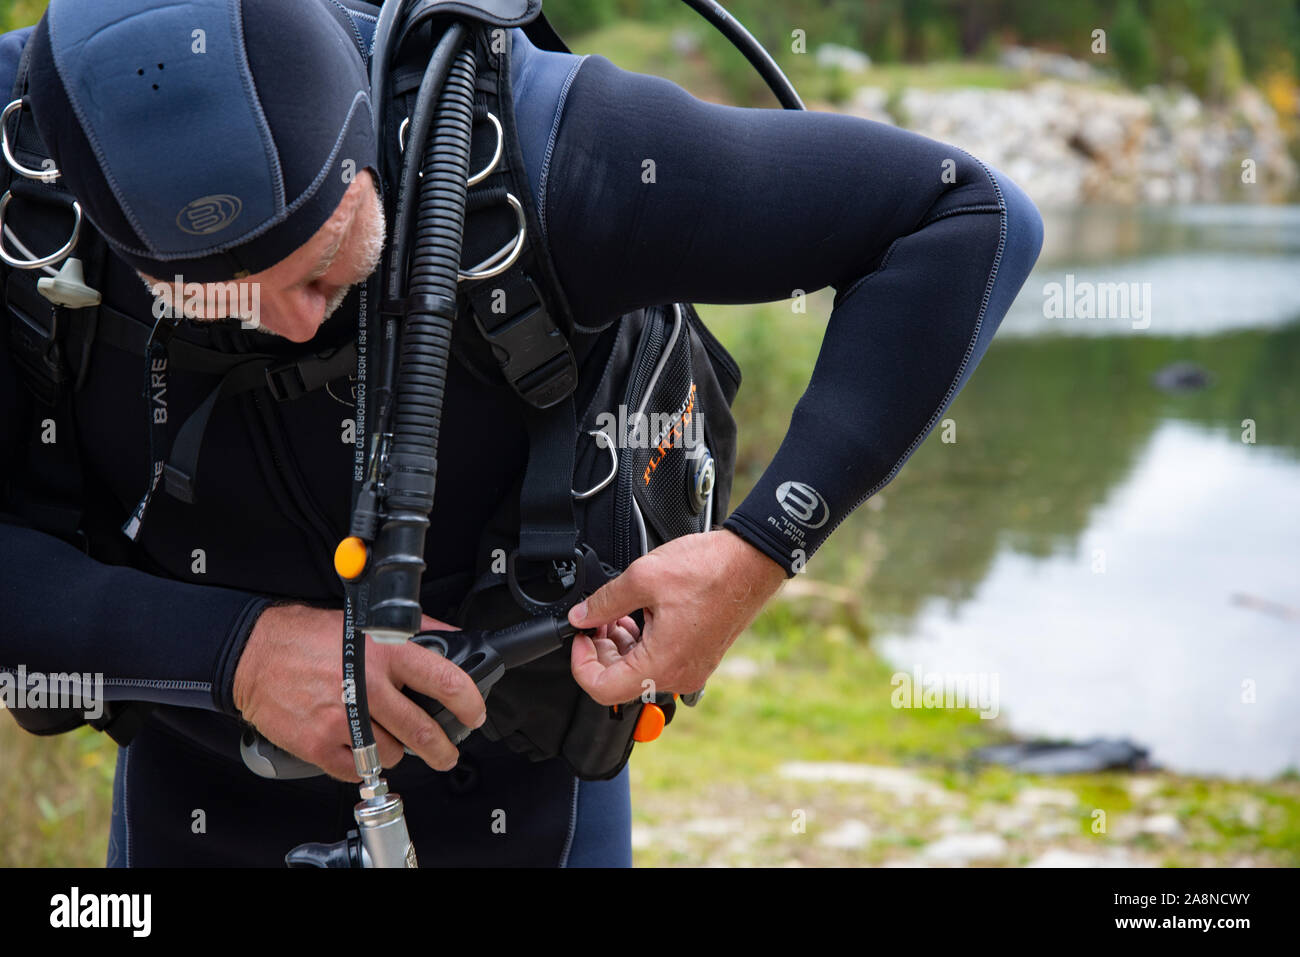 Paayanne lake, Finland - September 2019. Diver checks equipment near the lake. Male diver in wetsuit checking equipments before immerse Stock Photo